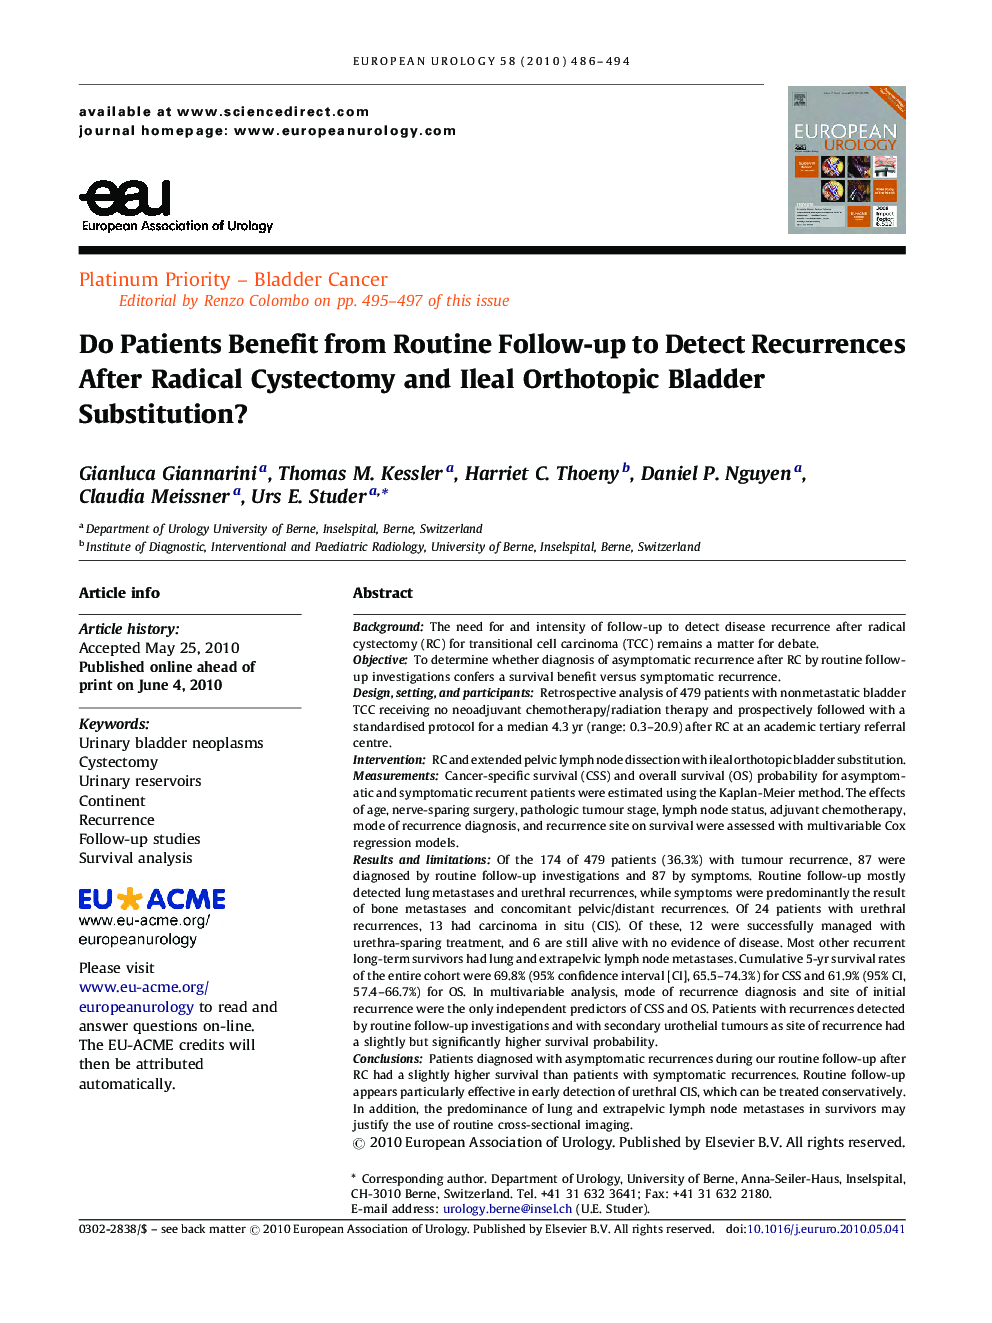 Do Patients Benefit from Routine Follow-up to Detect Recurrences After Radical Cystectomy and Ileal Orthotopic Bladder Substitution? 